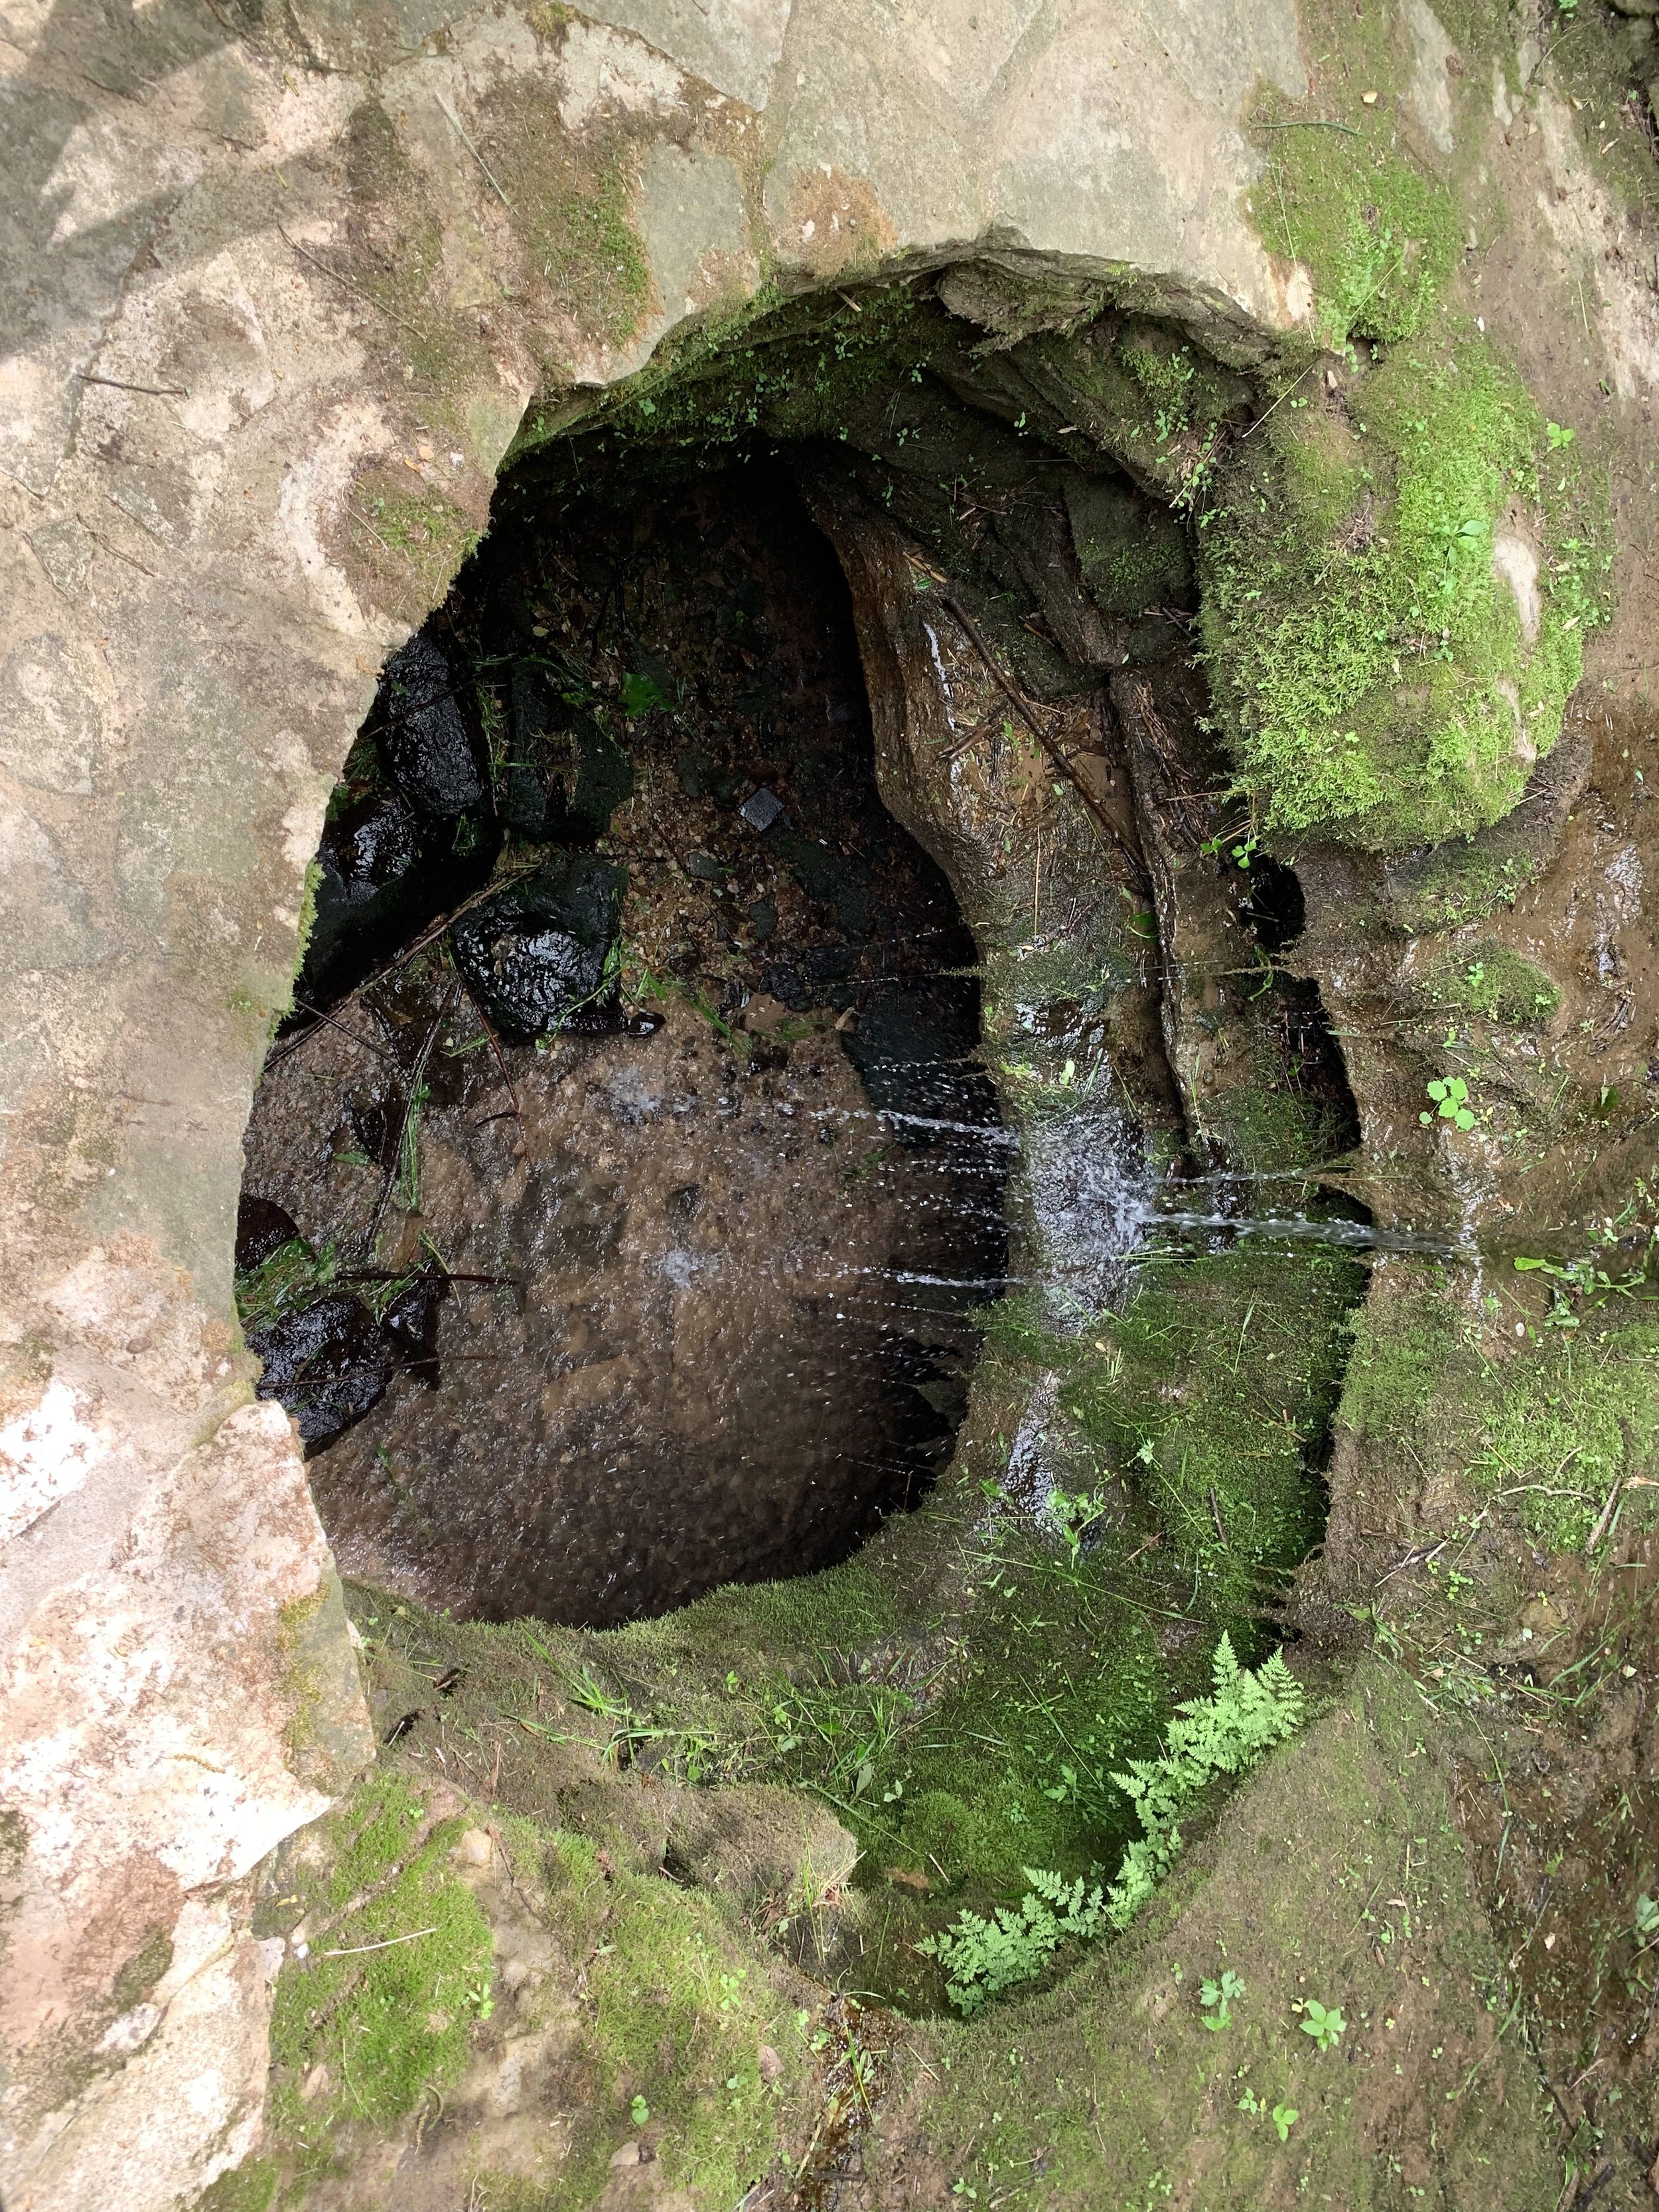 Looking Down Into the Sinkhole